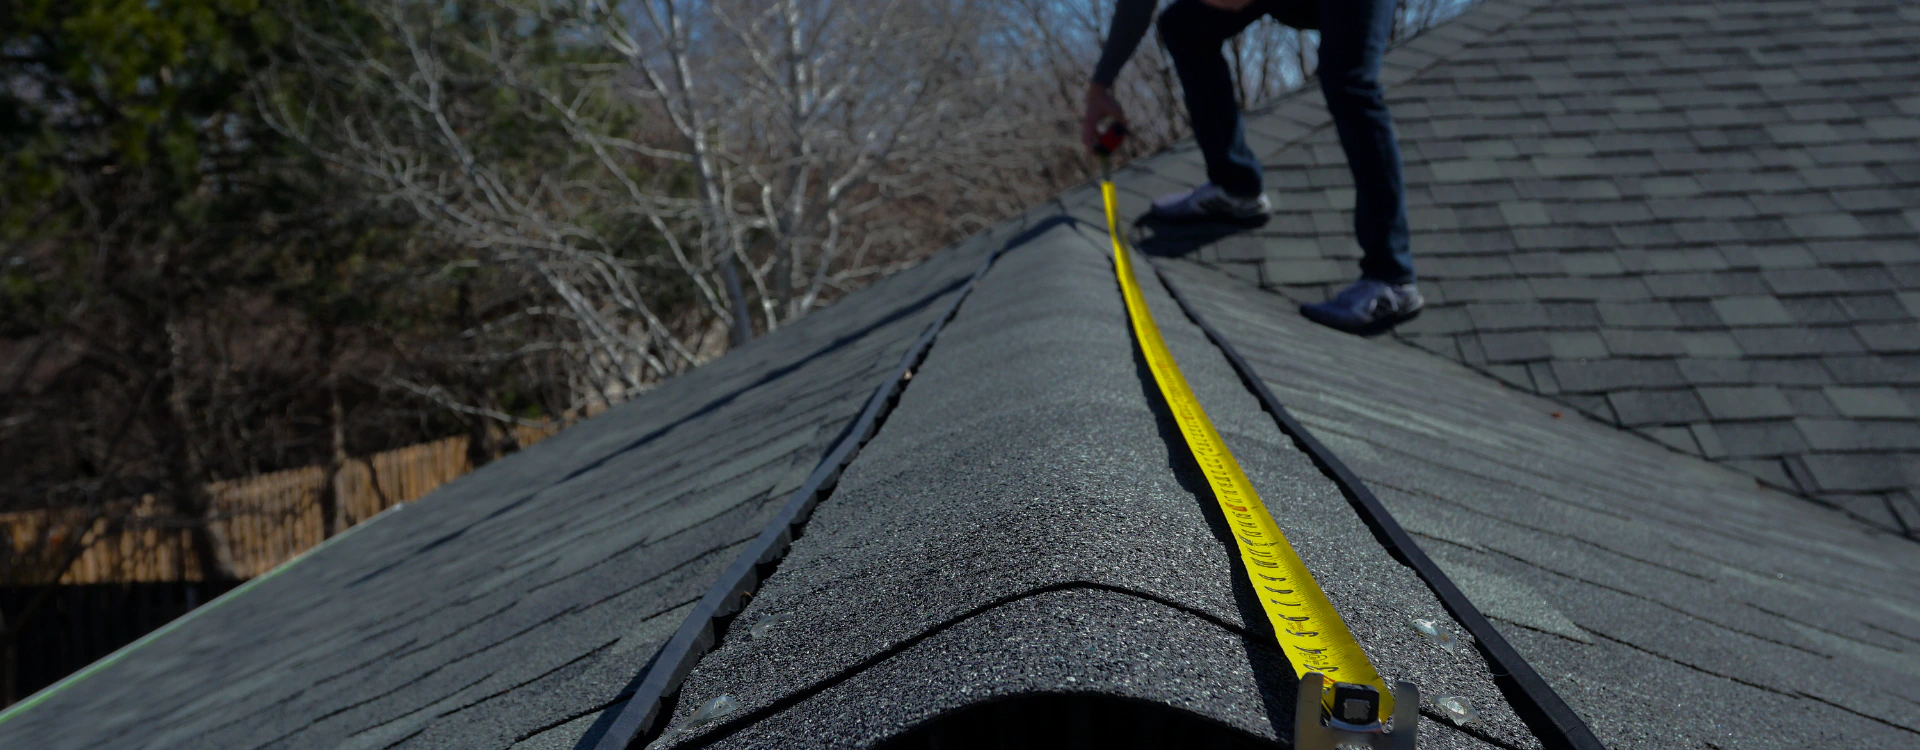 measuring roofing tape measures